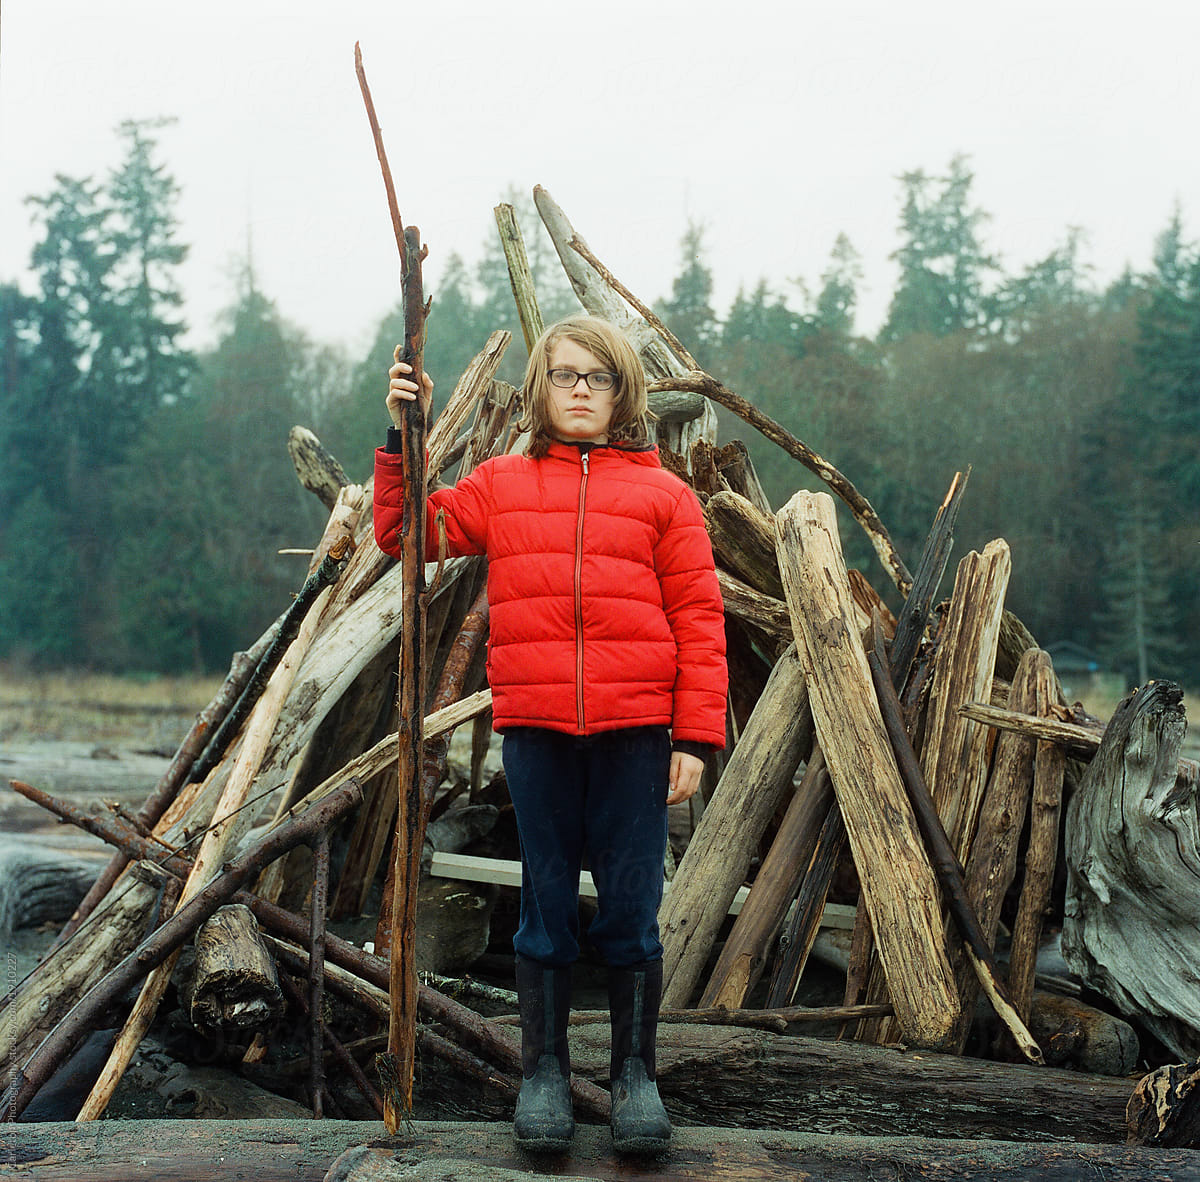 Boy stands guard with stick in front of driftwood castle